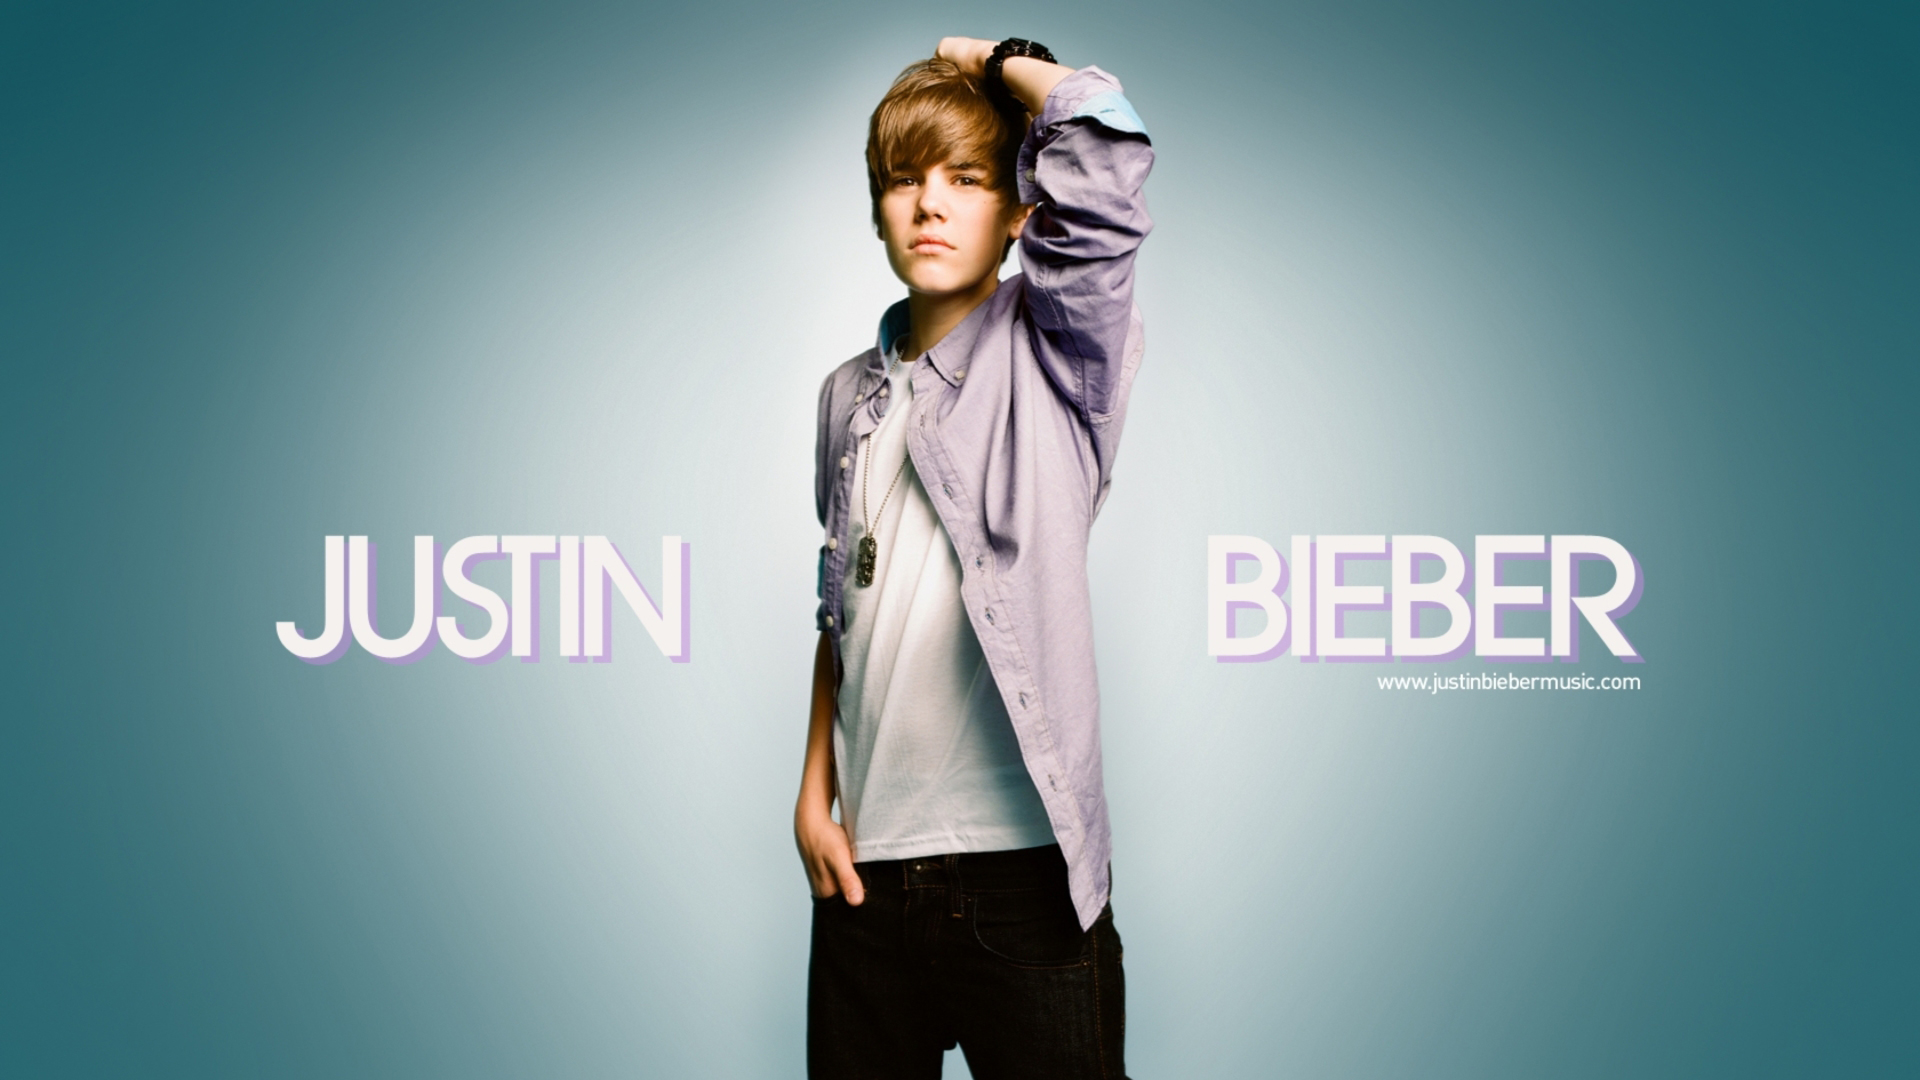 Awesome Justin Bieber Wallpaper HD Cool